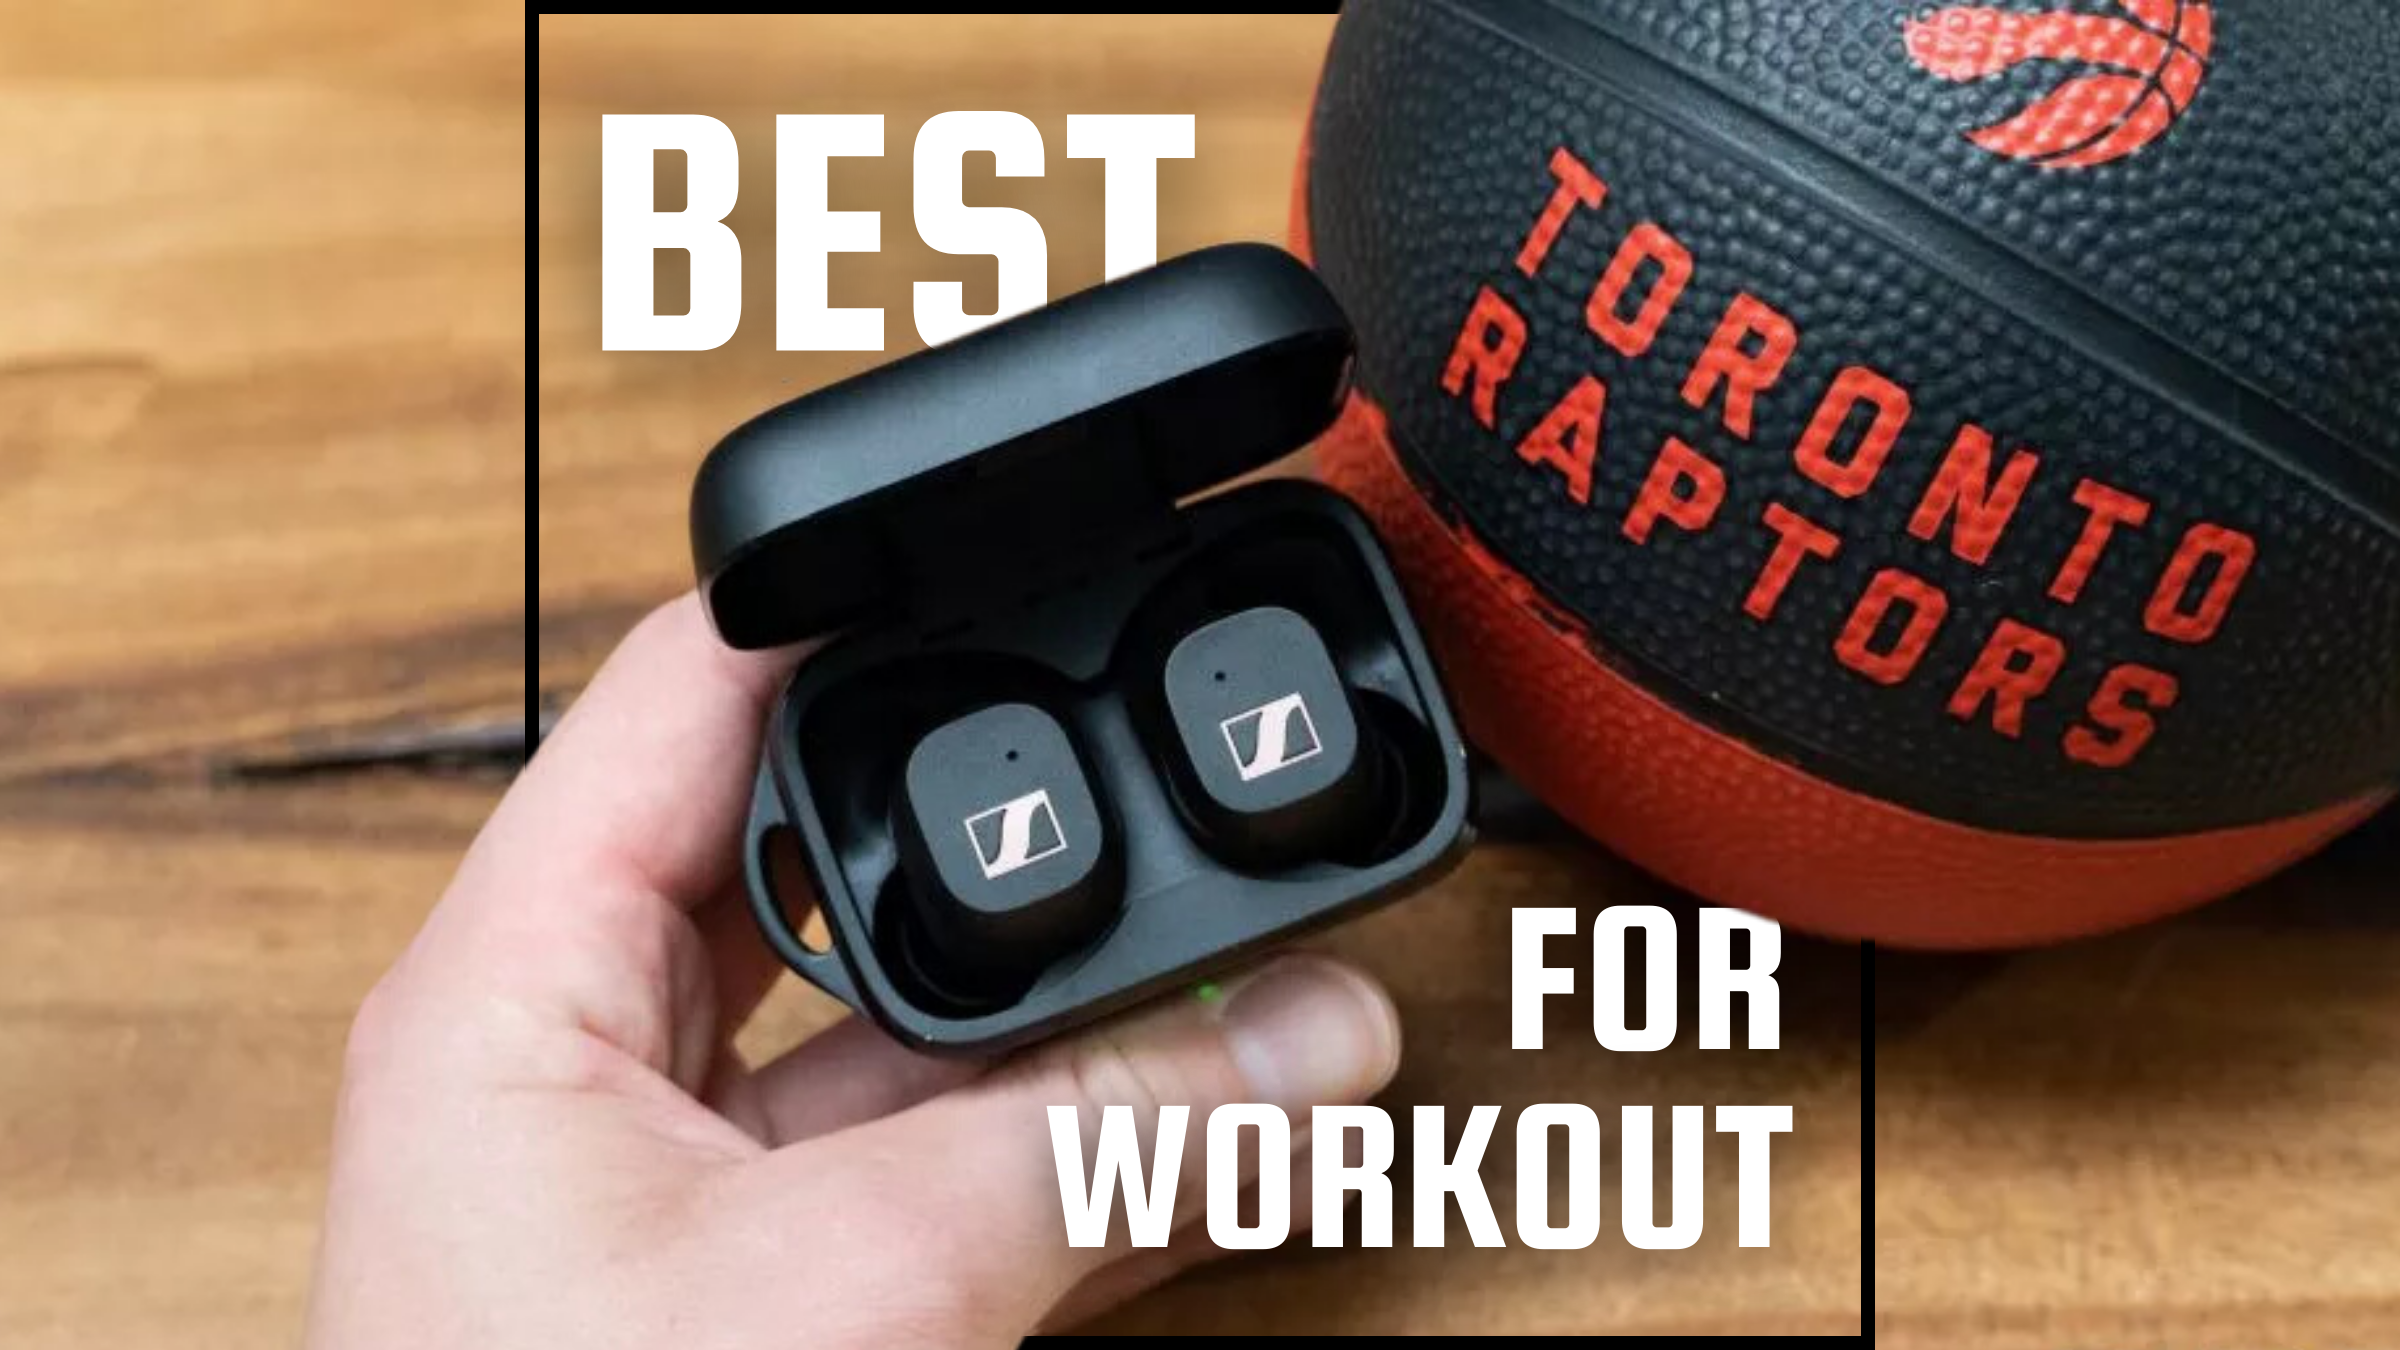 Best workout earbuds